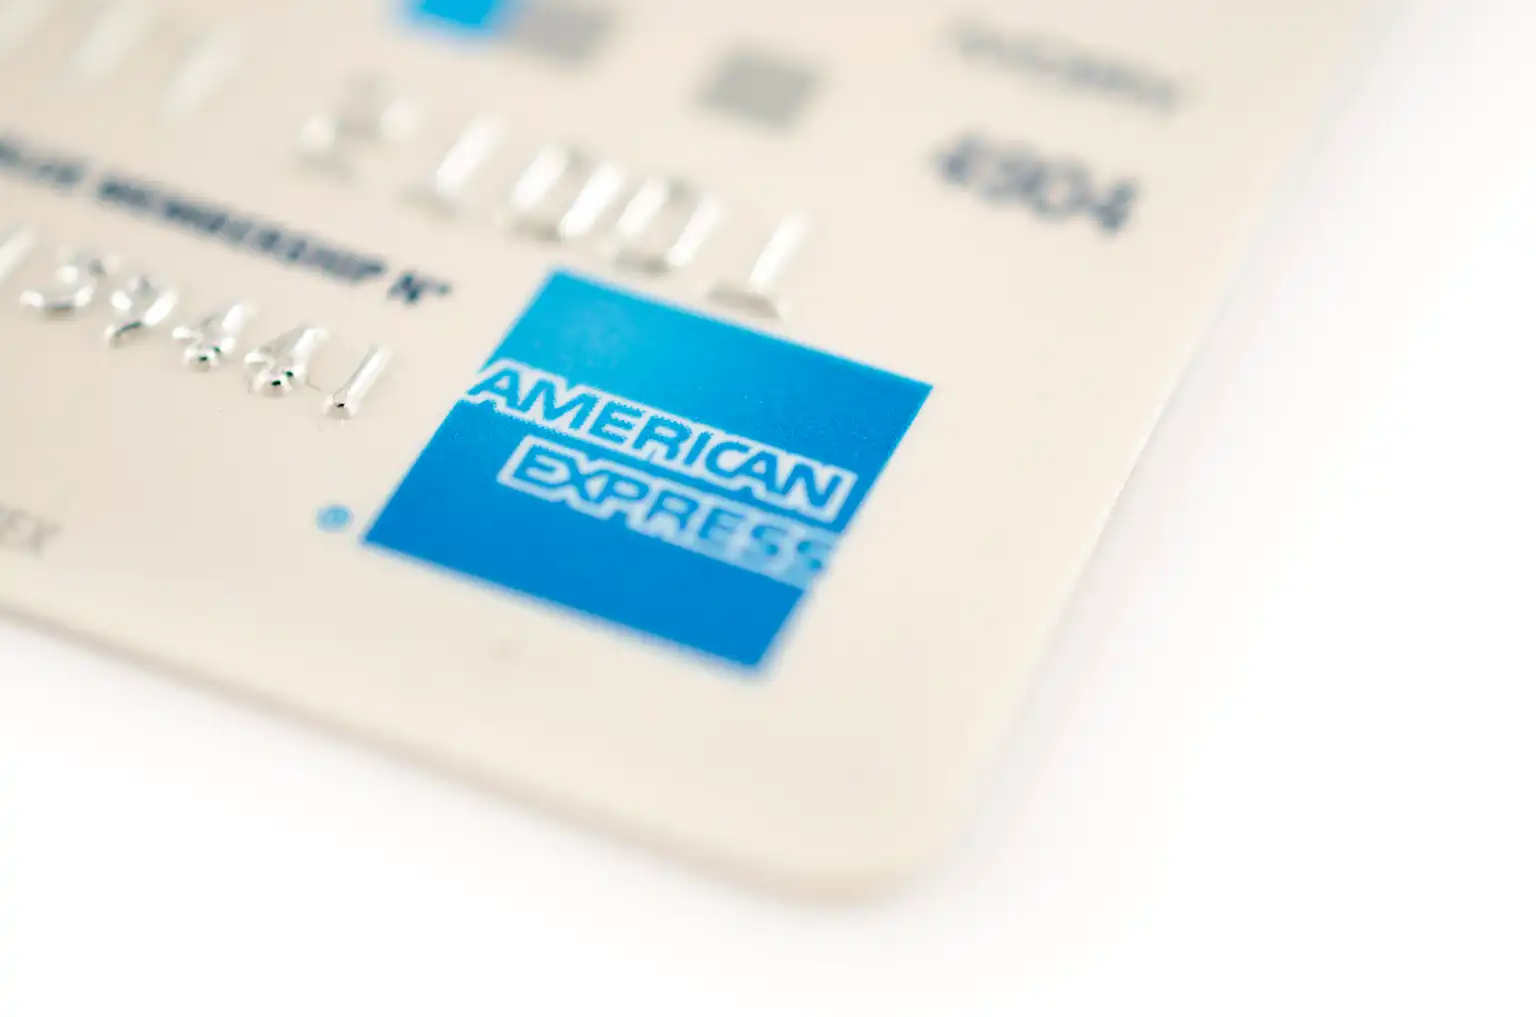 American Express: Reassuring Consistency And Stability - Seeking Alpha